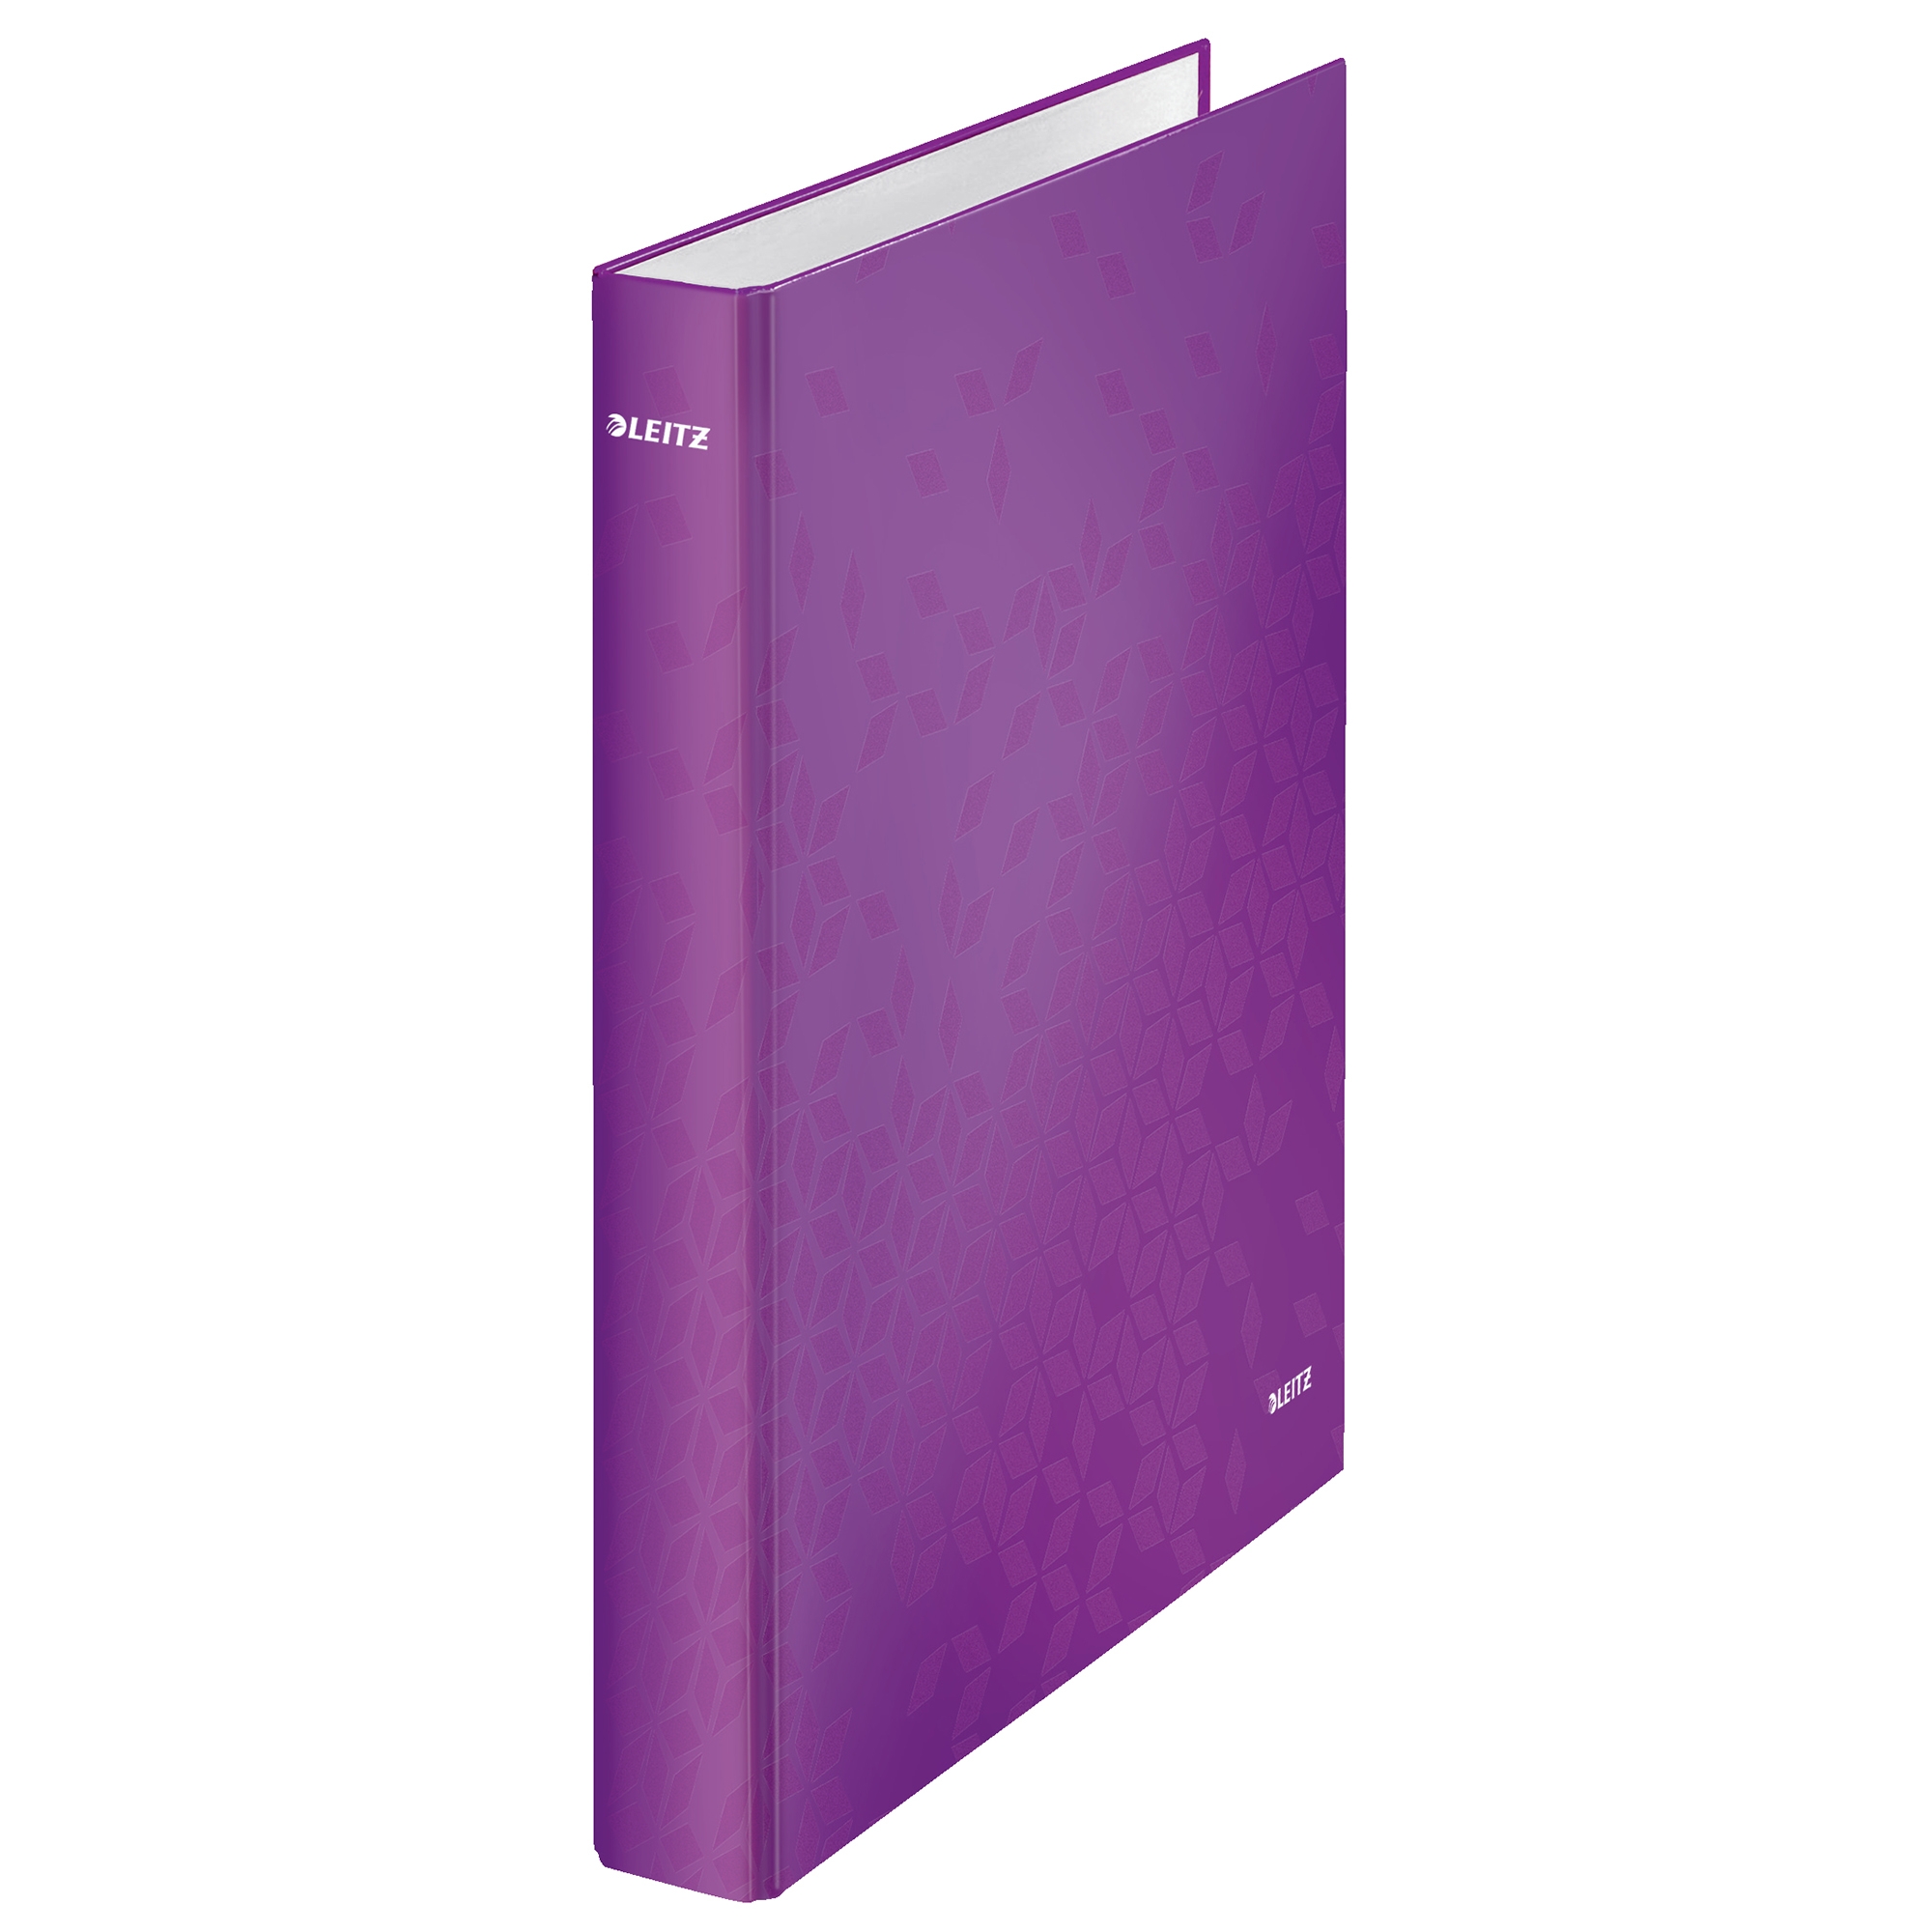 Leitz WOW Ring Binders, No1 for Quality Office Filing - Octopus UK